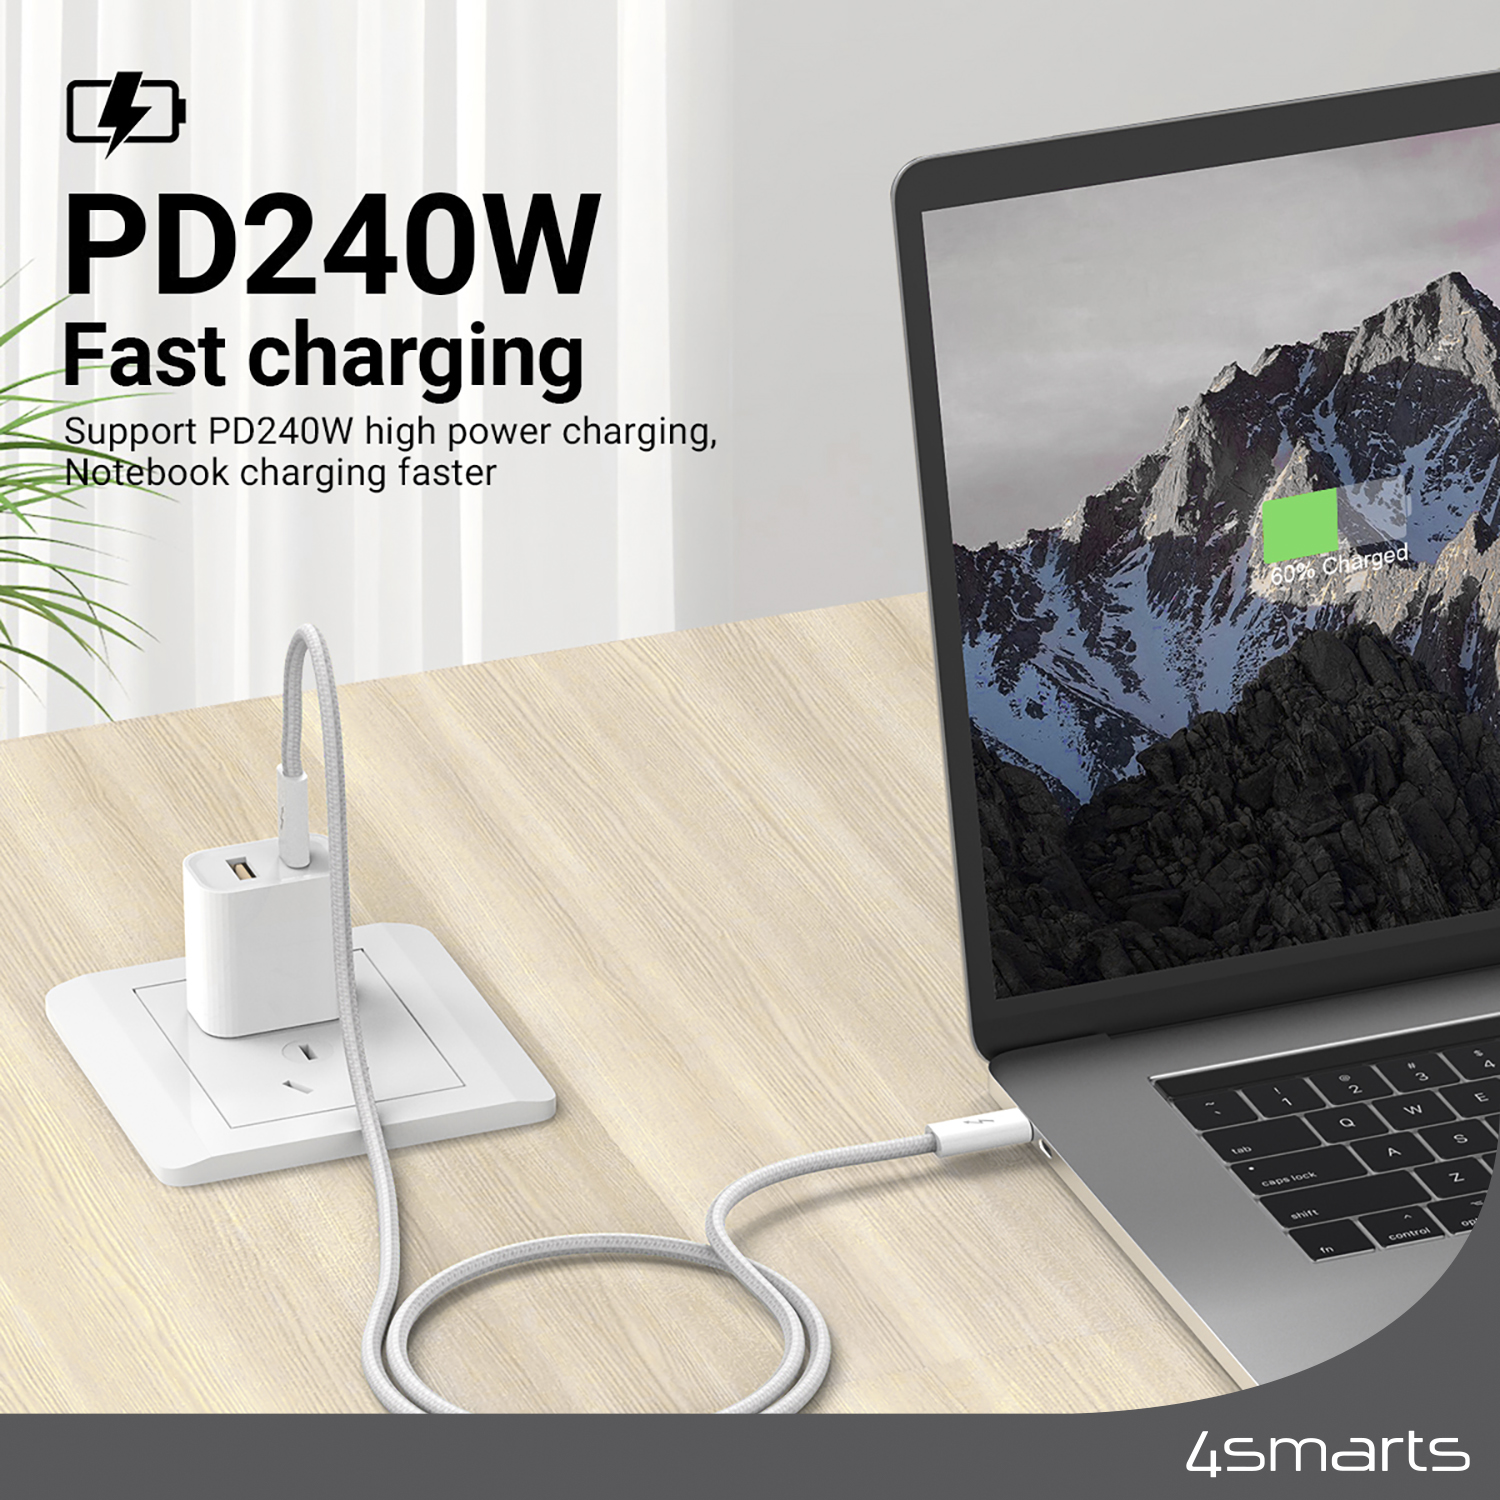 The 4smarts USB-C cable PremiumCord with 240W supports Power Delivery and fast charging.